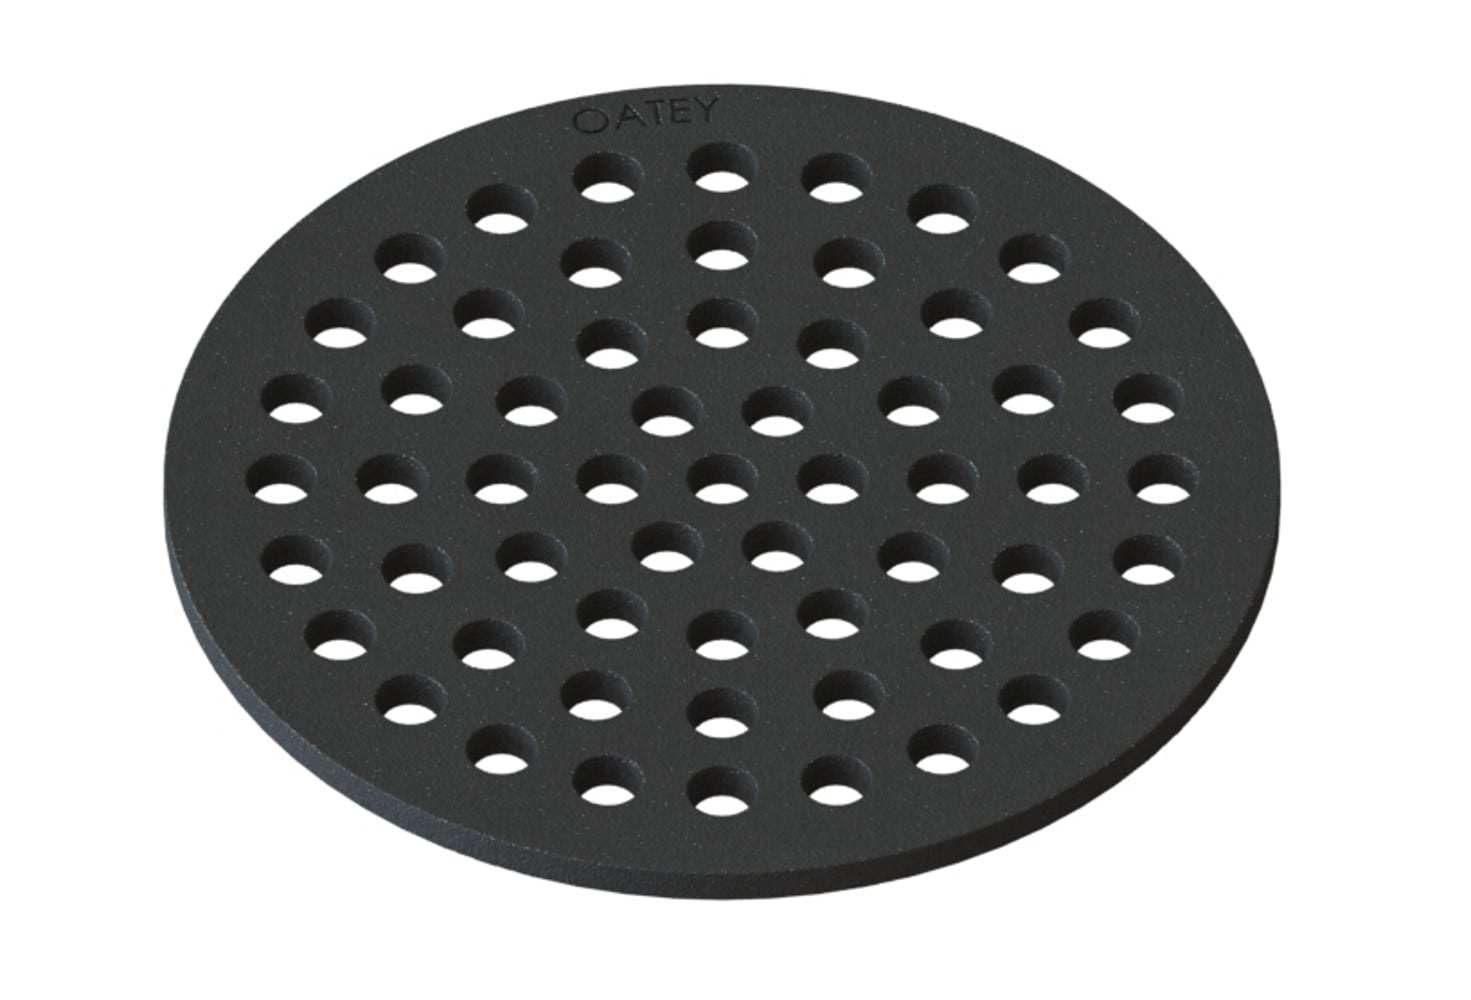 Crawford Drain Cover 3 (2 7/8) Round Drain Strainer Cover - Brushed  Stainless